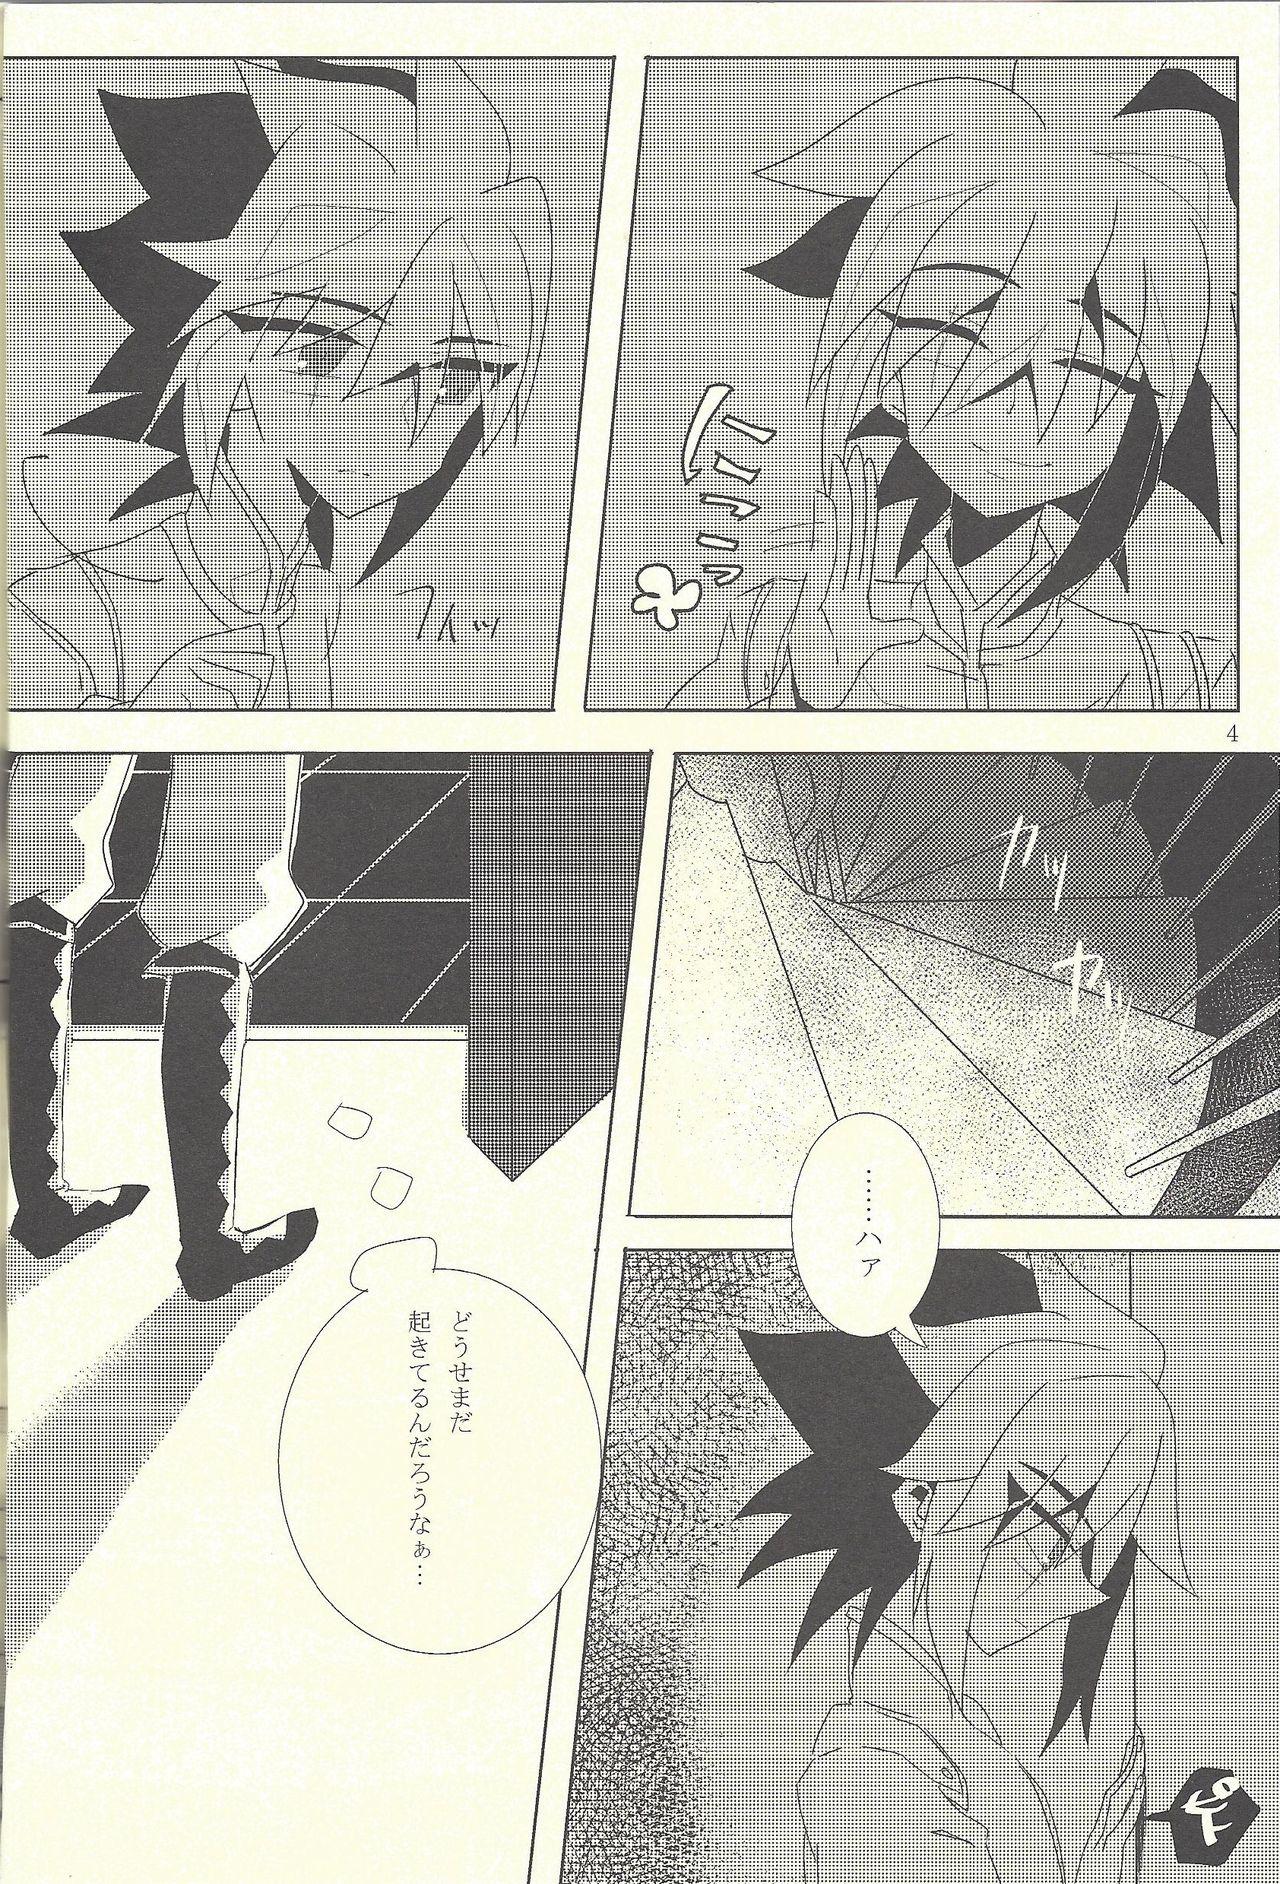 Boobies Chocolate Butler - Yu gi oh zexal Old And Young - Page 3